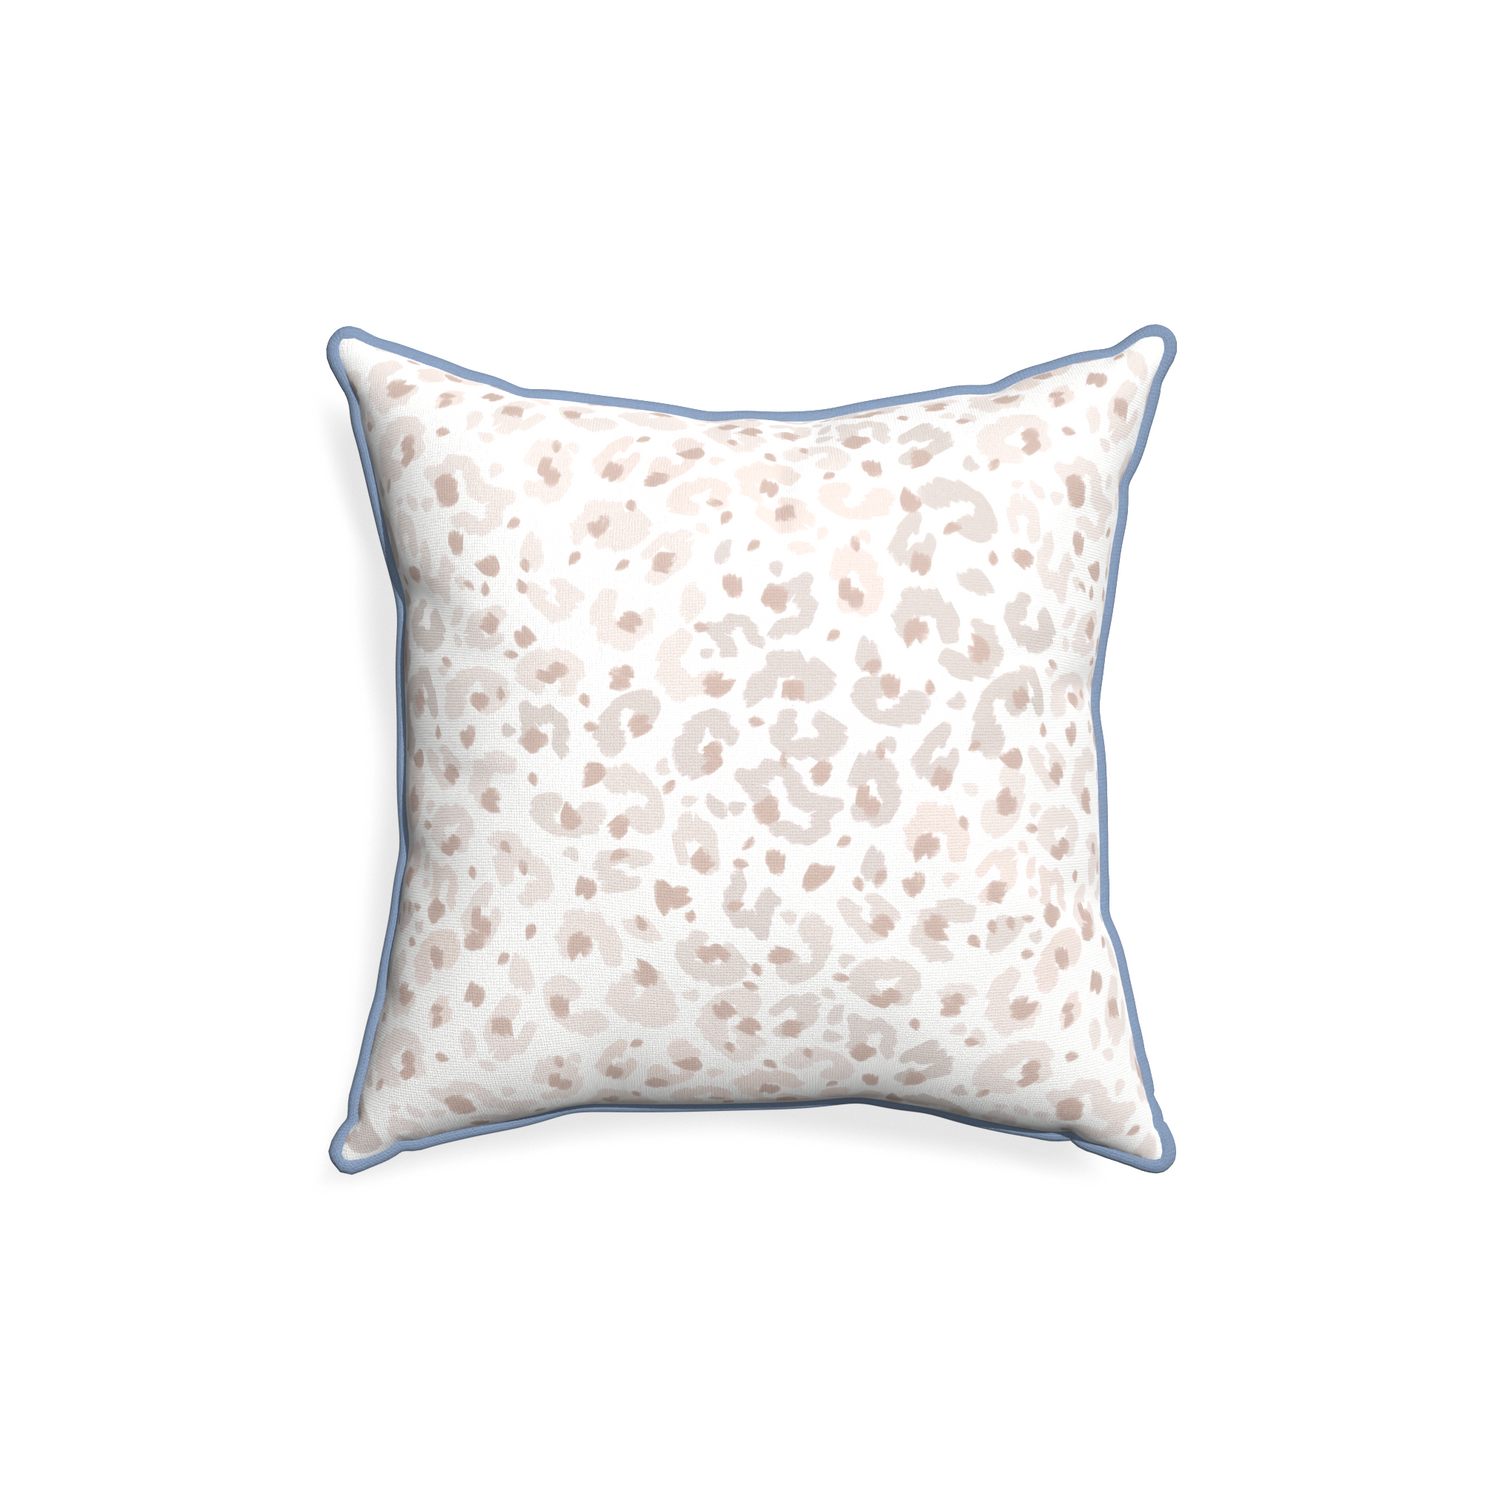 18-square rosie custom beige animal printpillow with sky piping on white background